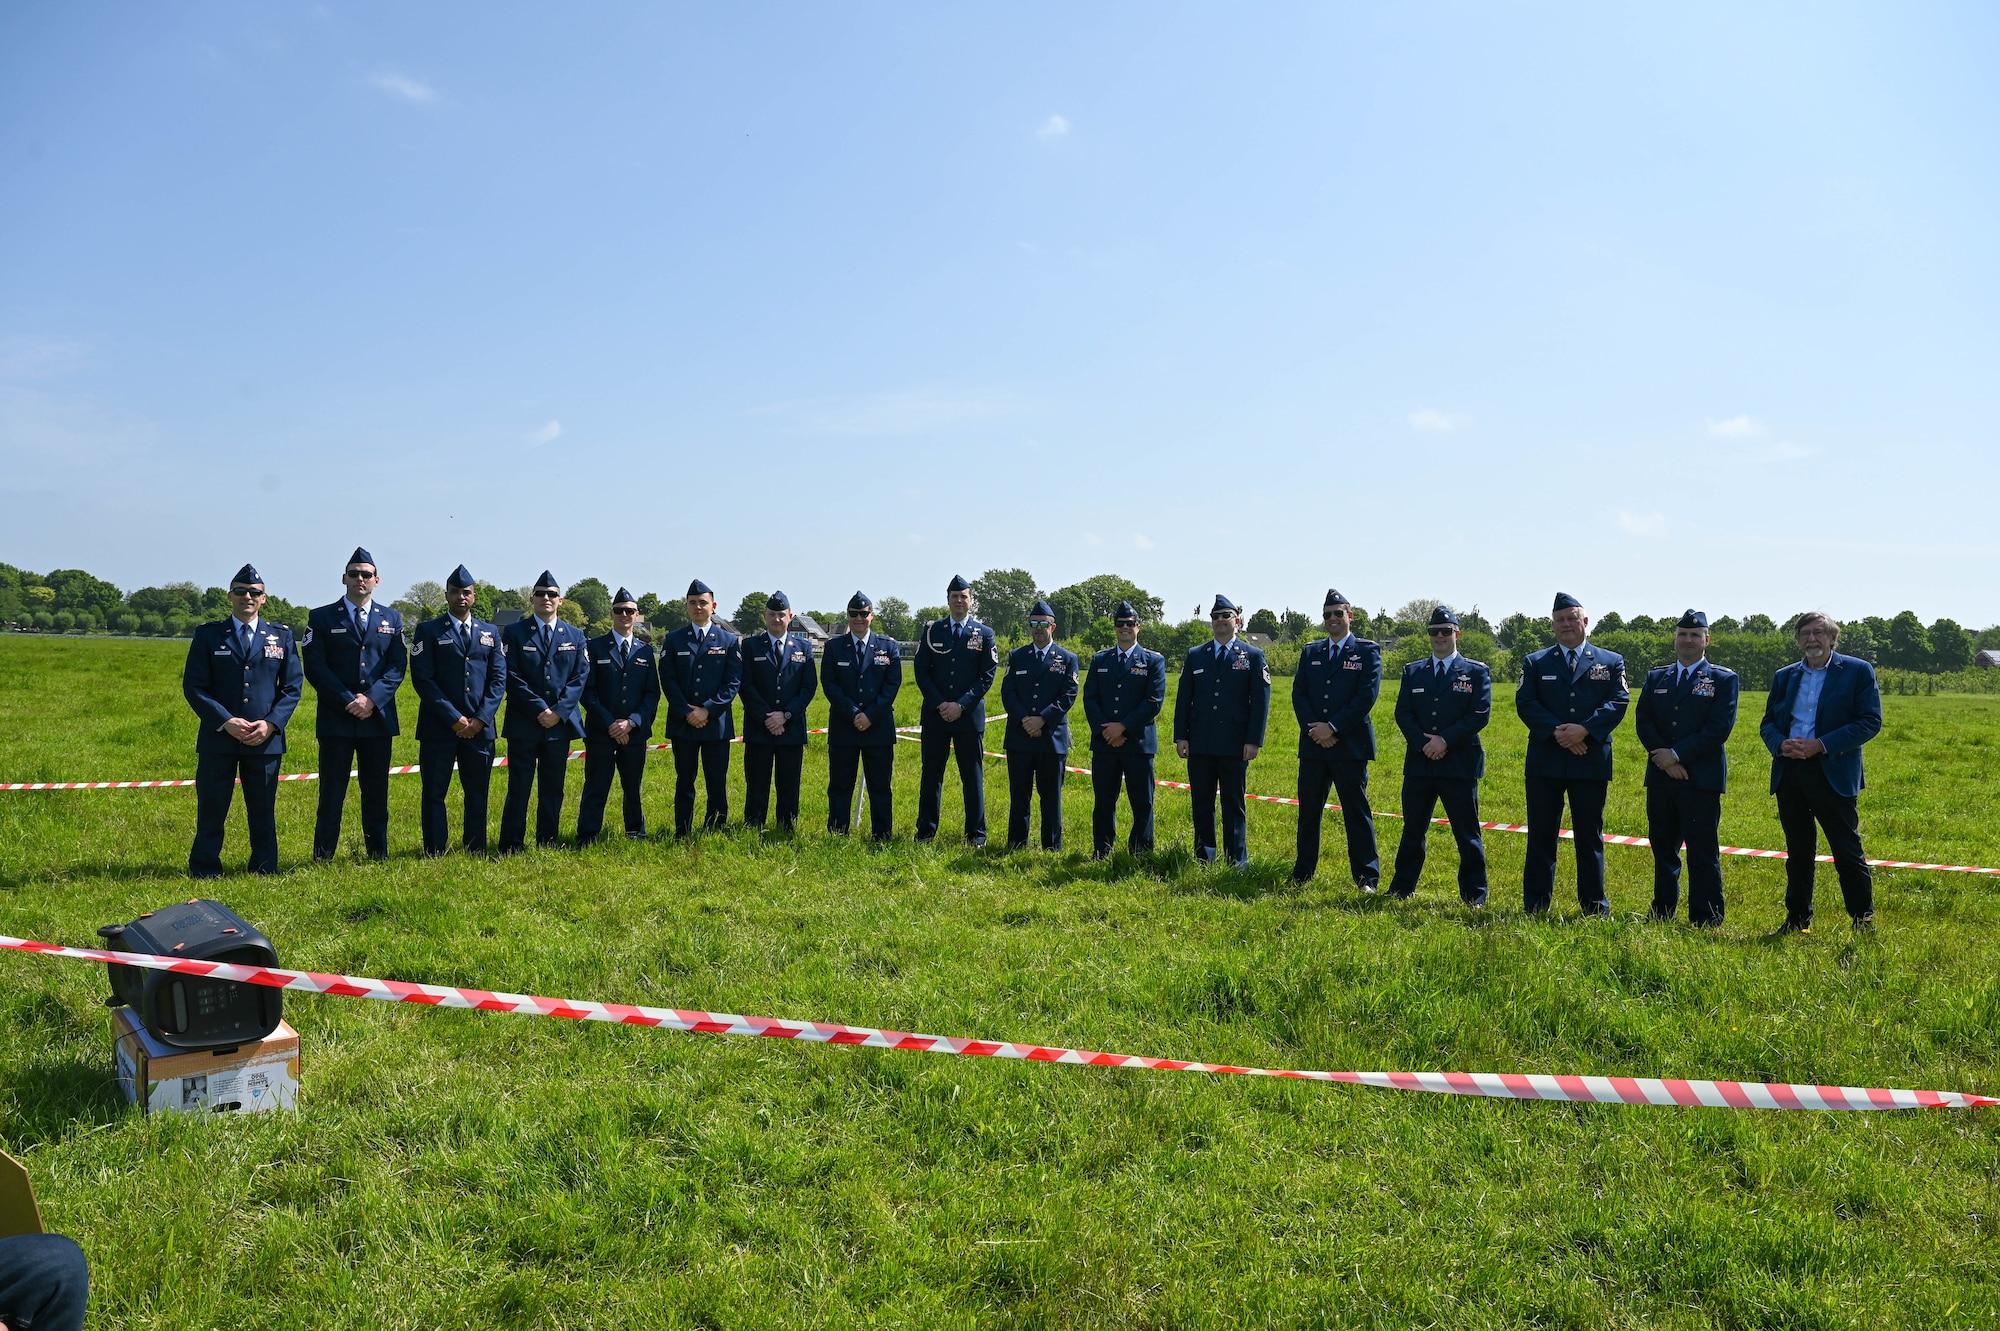 A group of men in their dress blue uniform stand in a line on a sectioned off area in a green field of grass